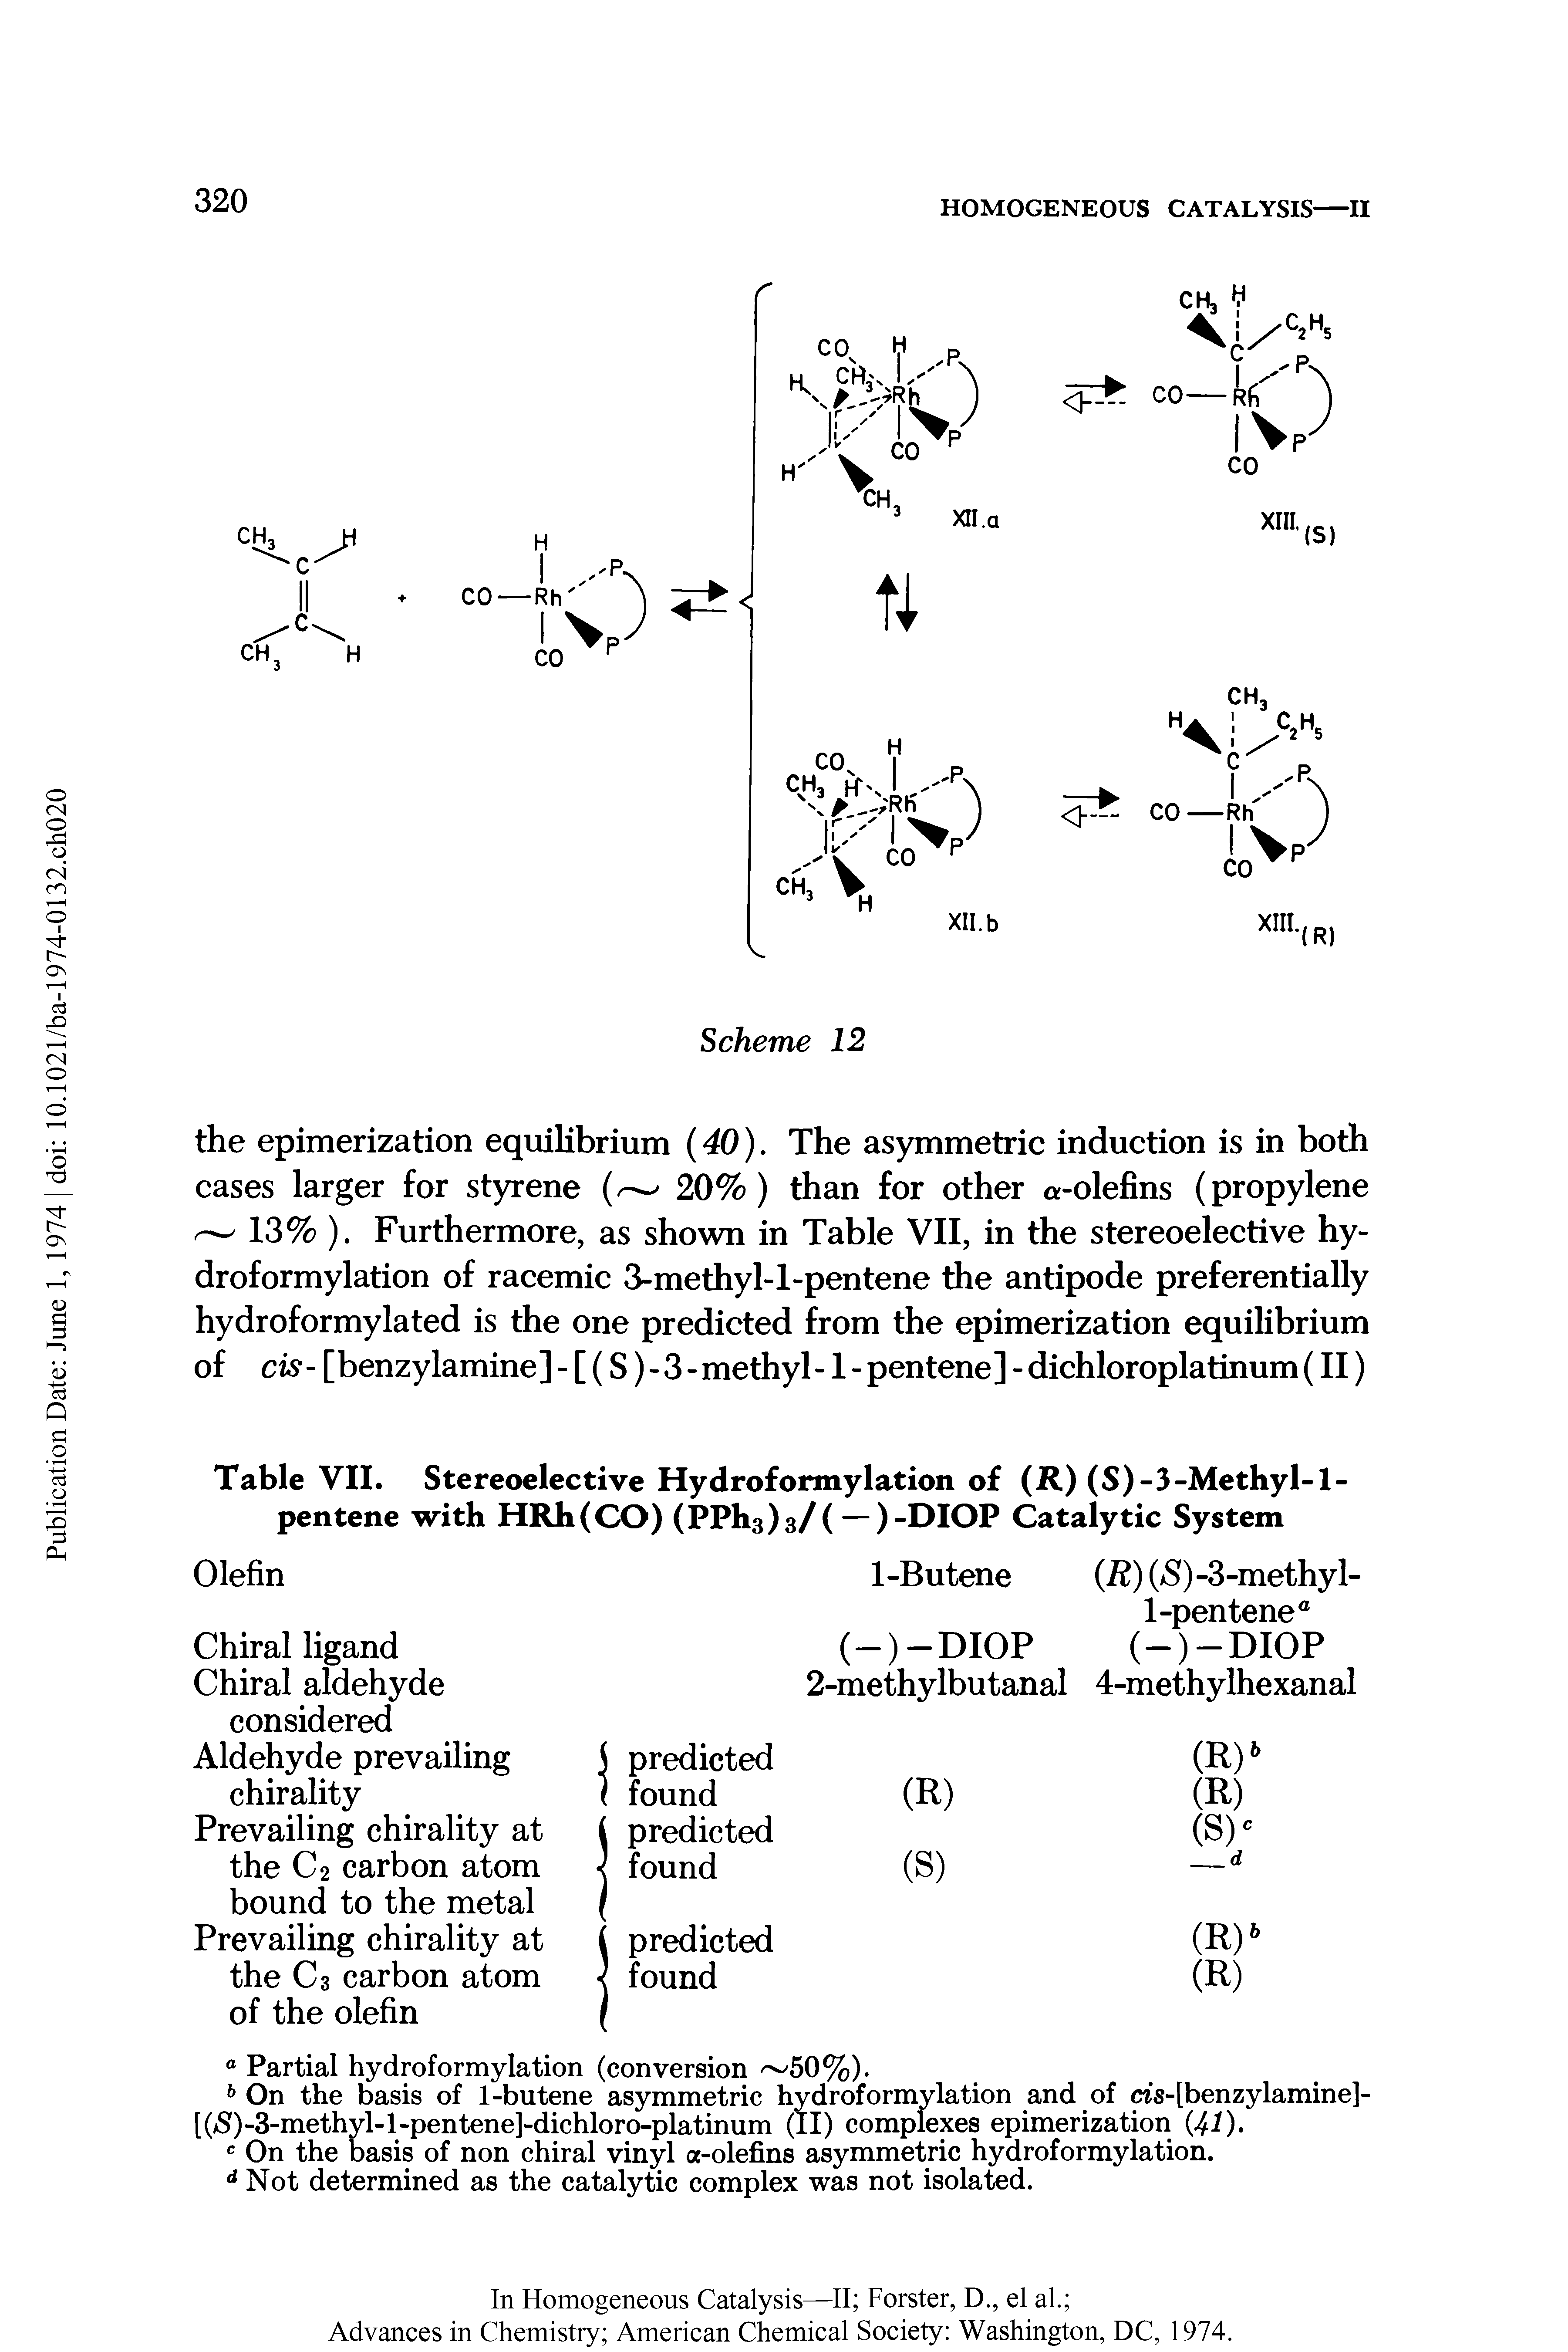 Table VII. Stereoelective Hydroformylation of (R) (S)-3-Methyl-1-pentene with HRh(CO) (PPh3)3/( — )-DIOP Catalytic System...